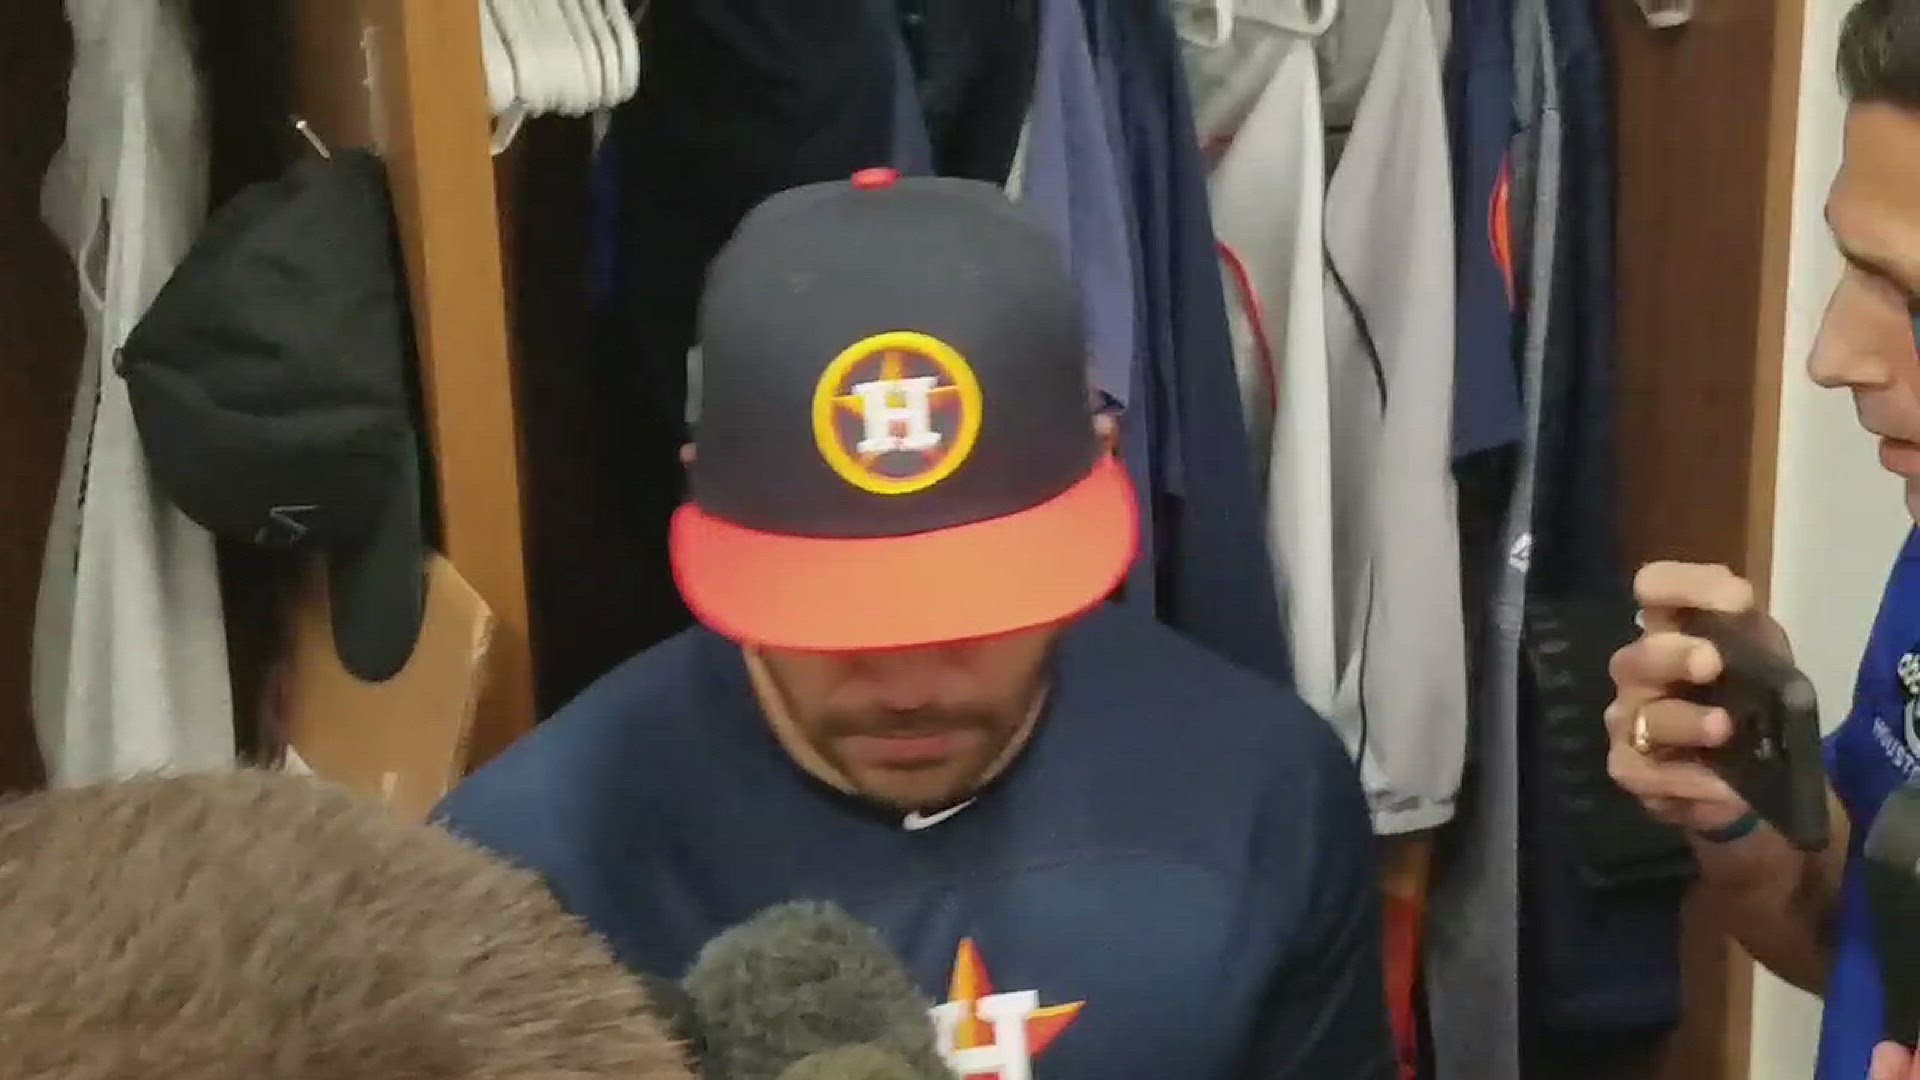 Jose Altuve spoke to the media for the first time during spring training just before Monday's full squad workout.